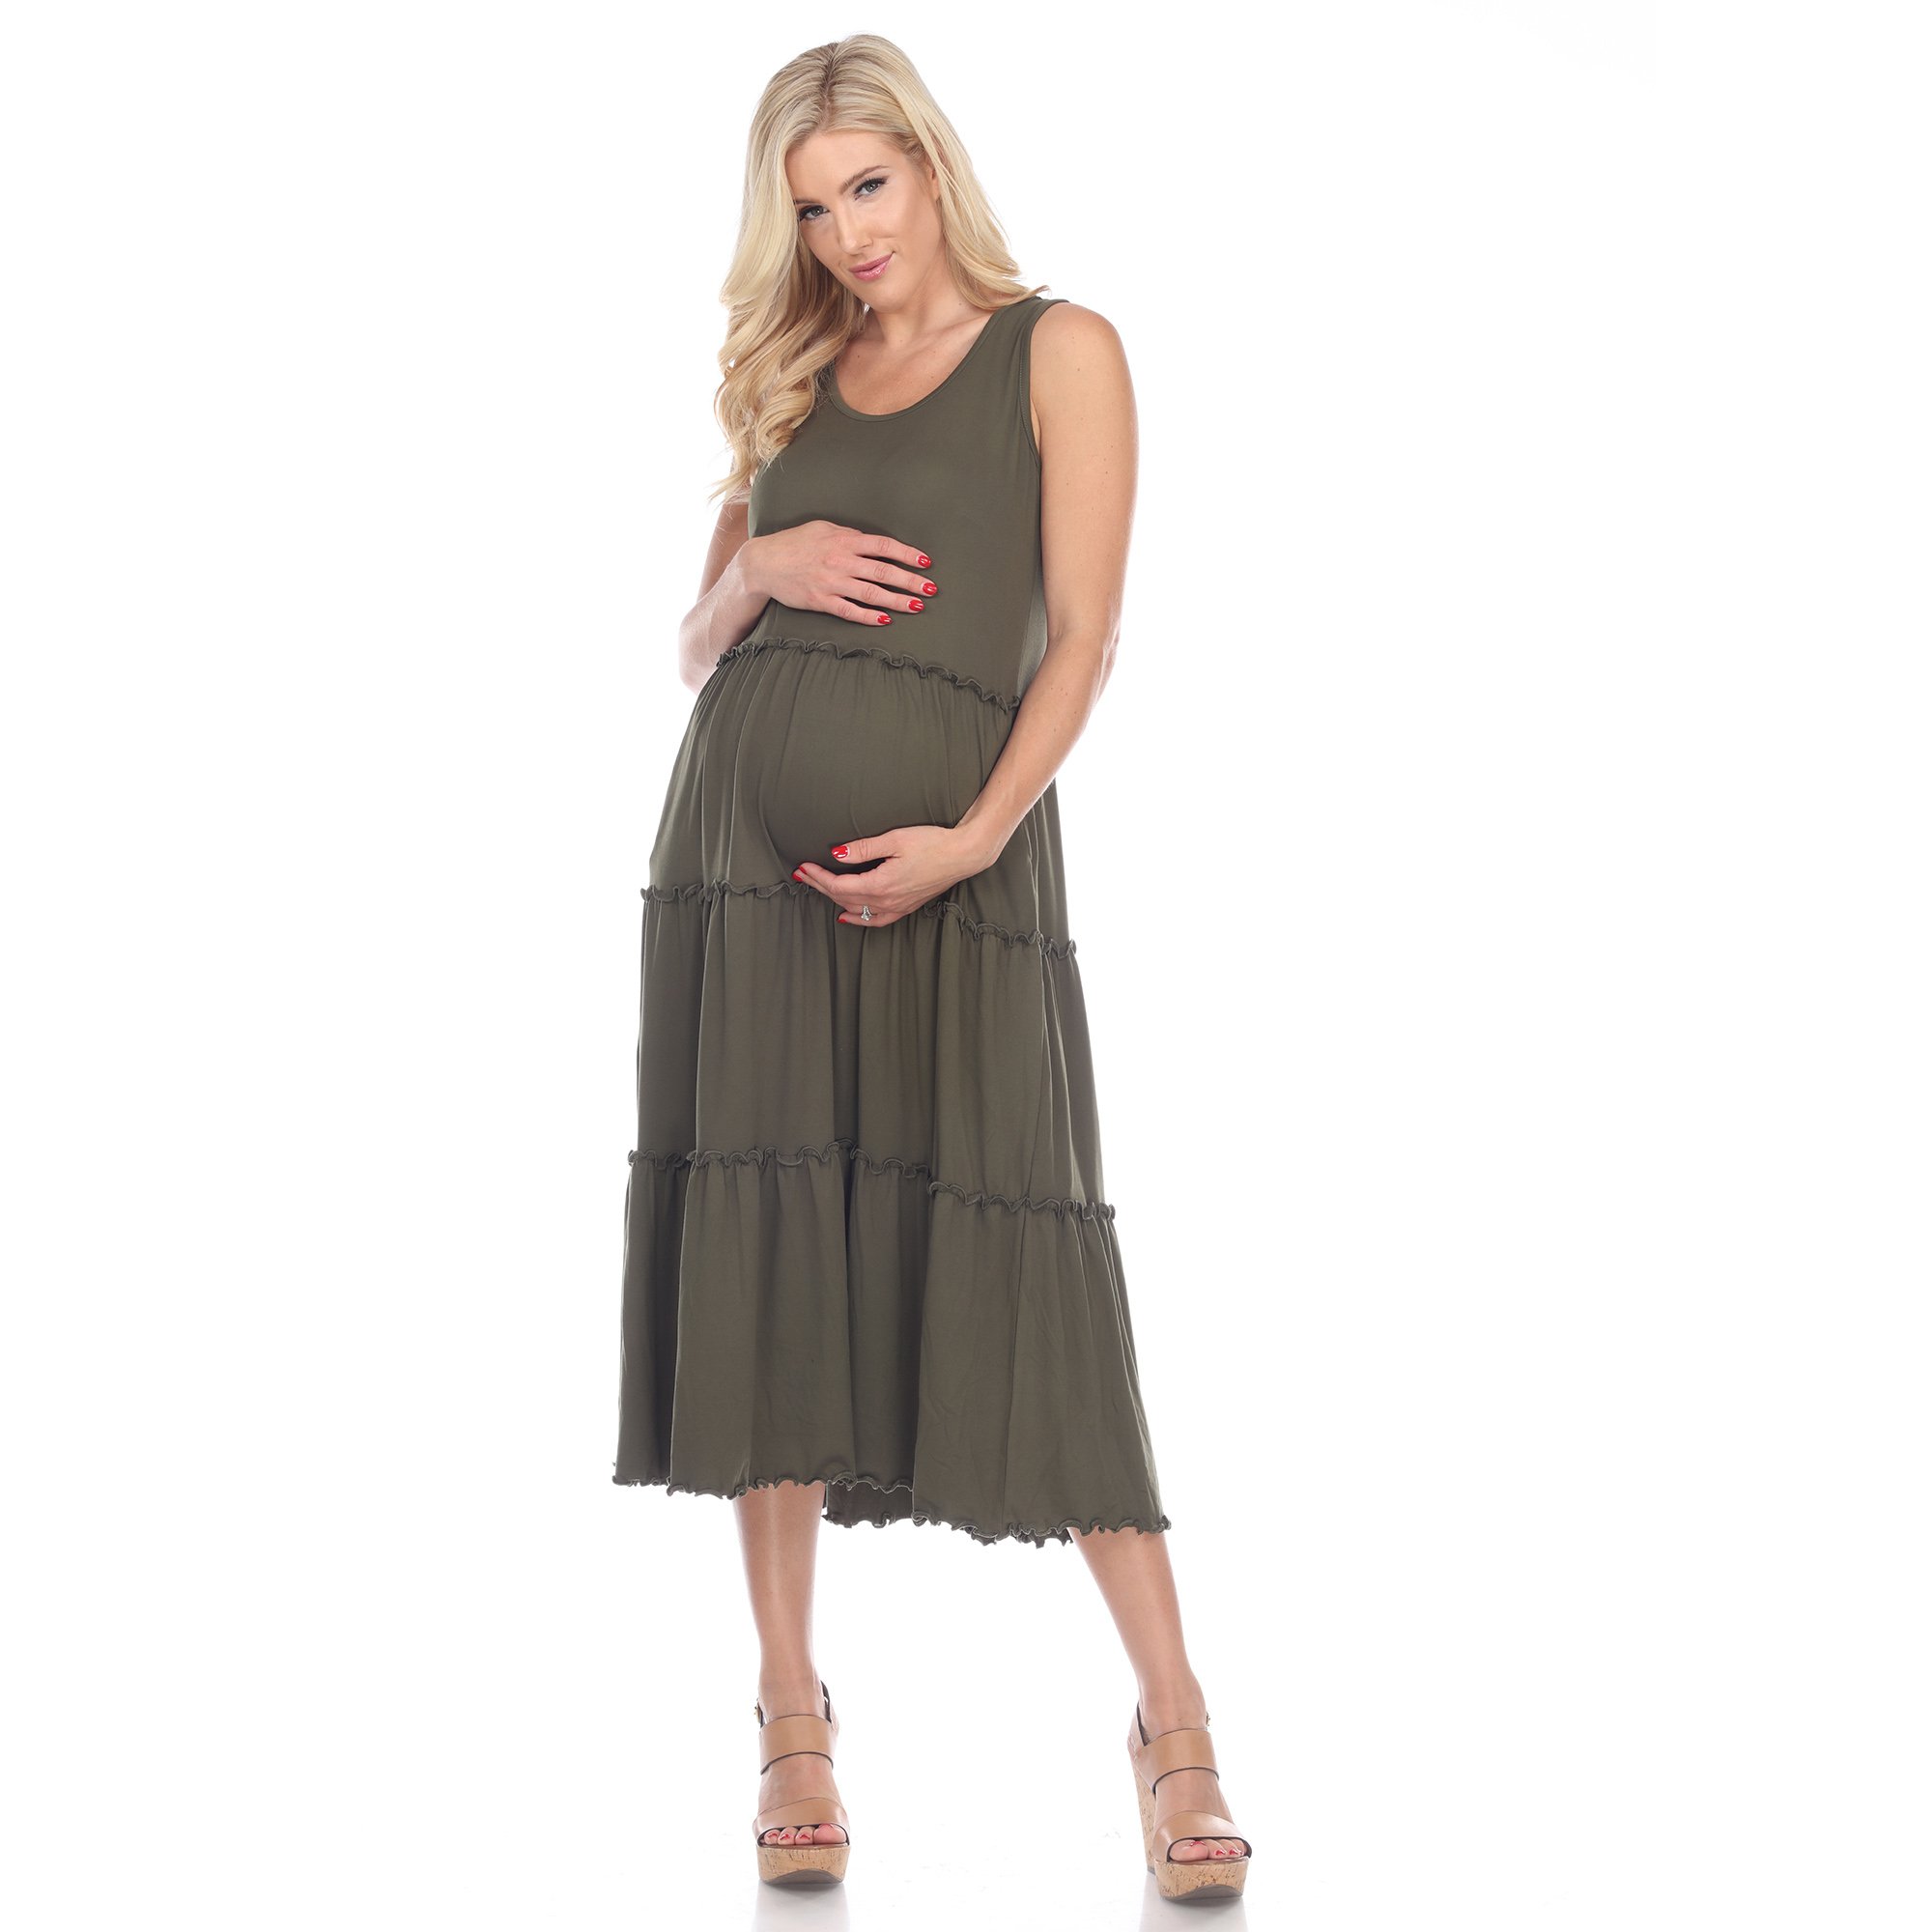 White Mark Women's Maternity Scoop Neck Tiered Midi Dress - Pale Olive, Large